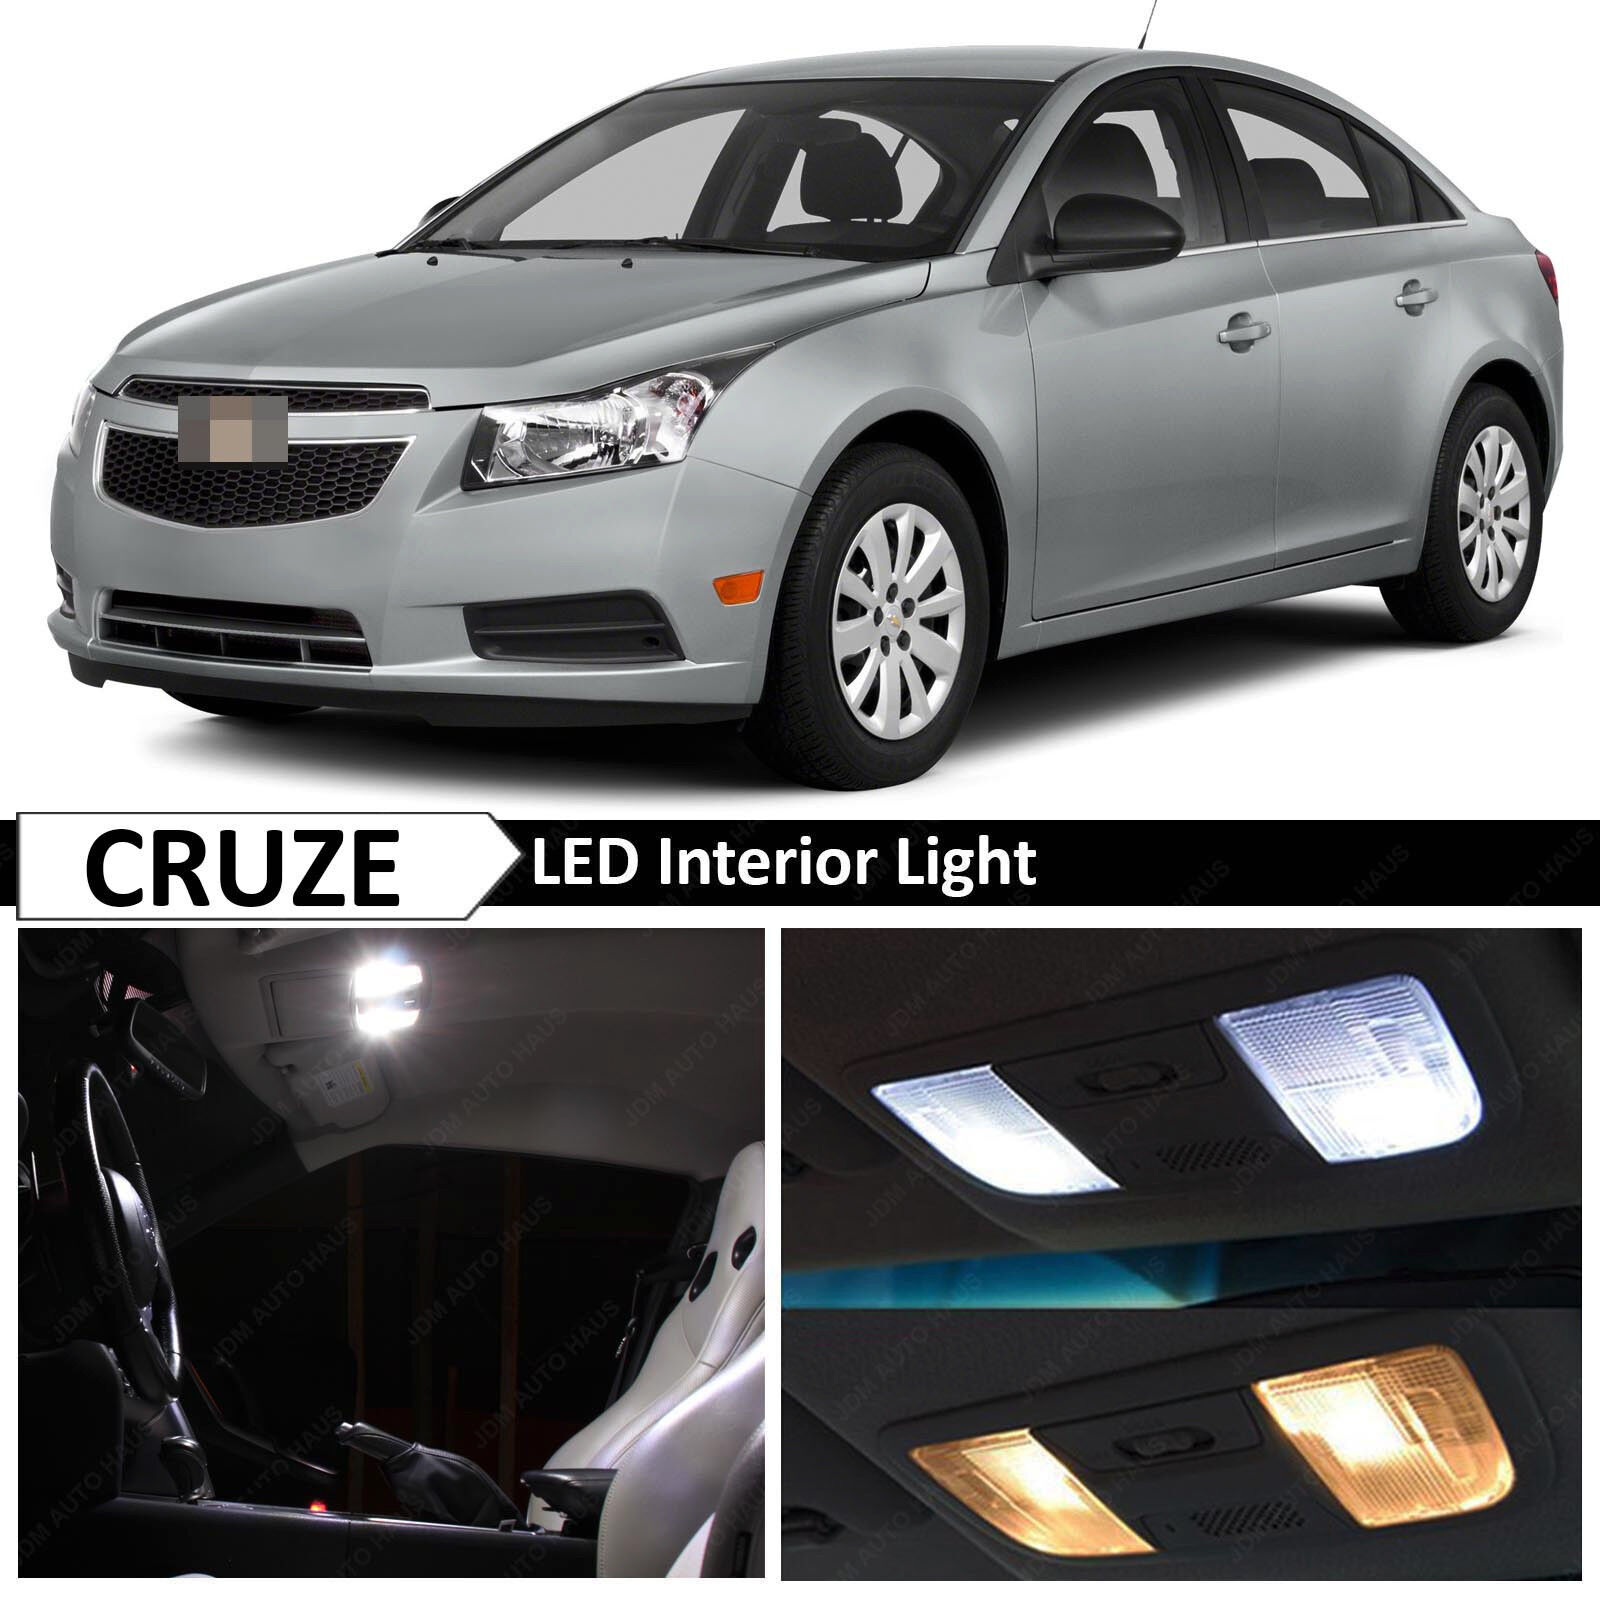 9x White LED Lights Interior Package Kit for 2011-2014 Chevy Cruze + TOOL